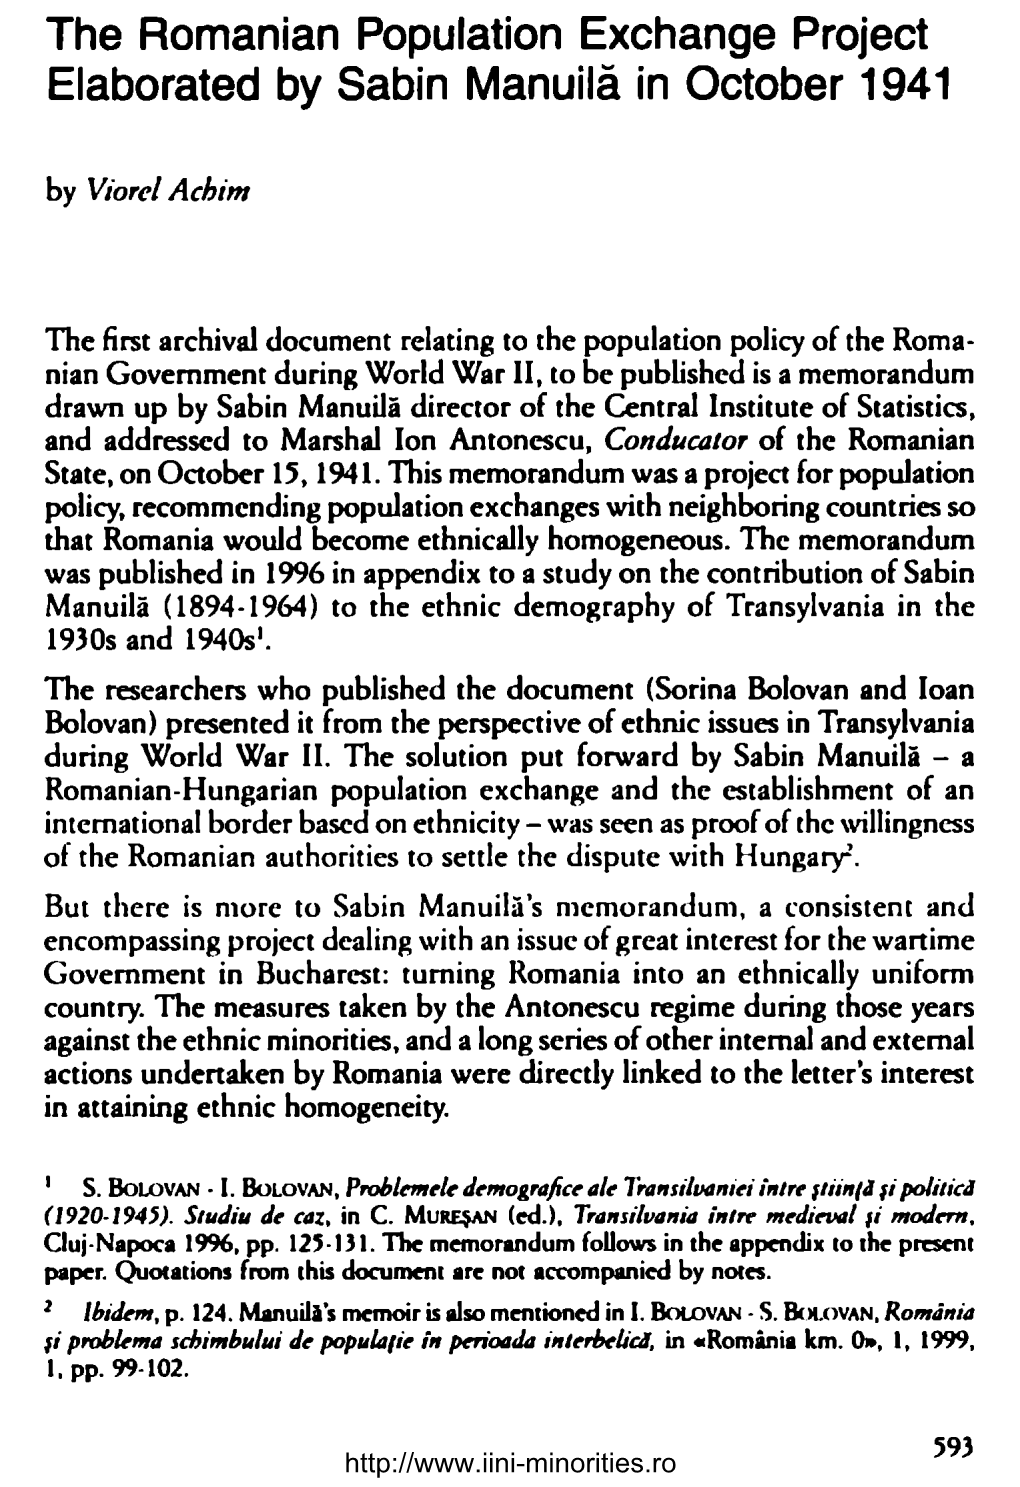 The Romanian Population Exchange Project Elaborated by Sabin Manuilă in October 1941